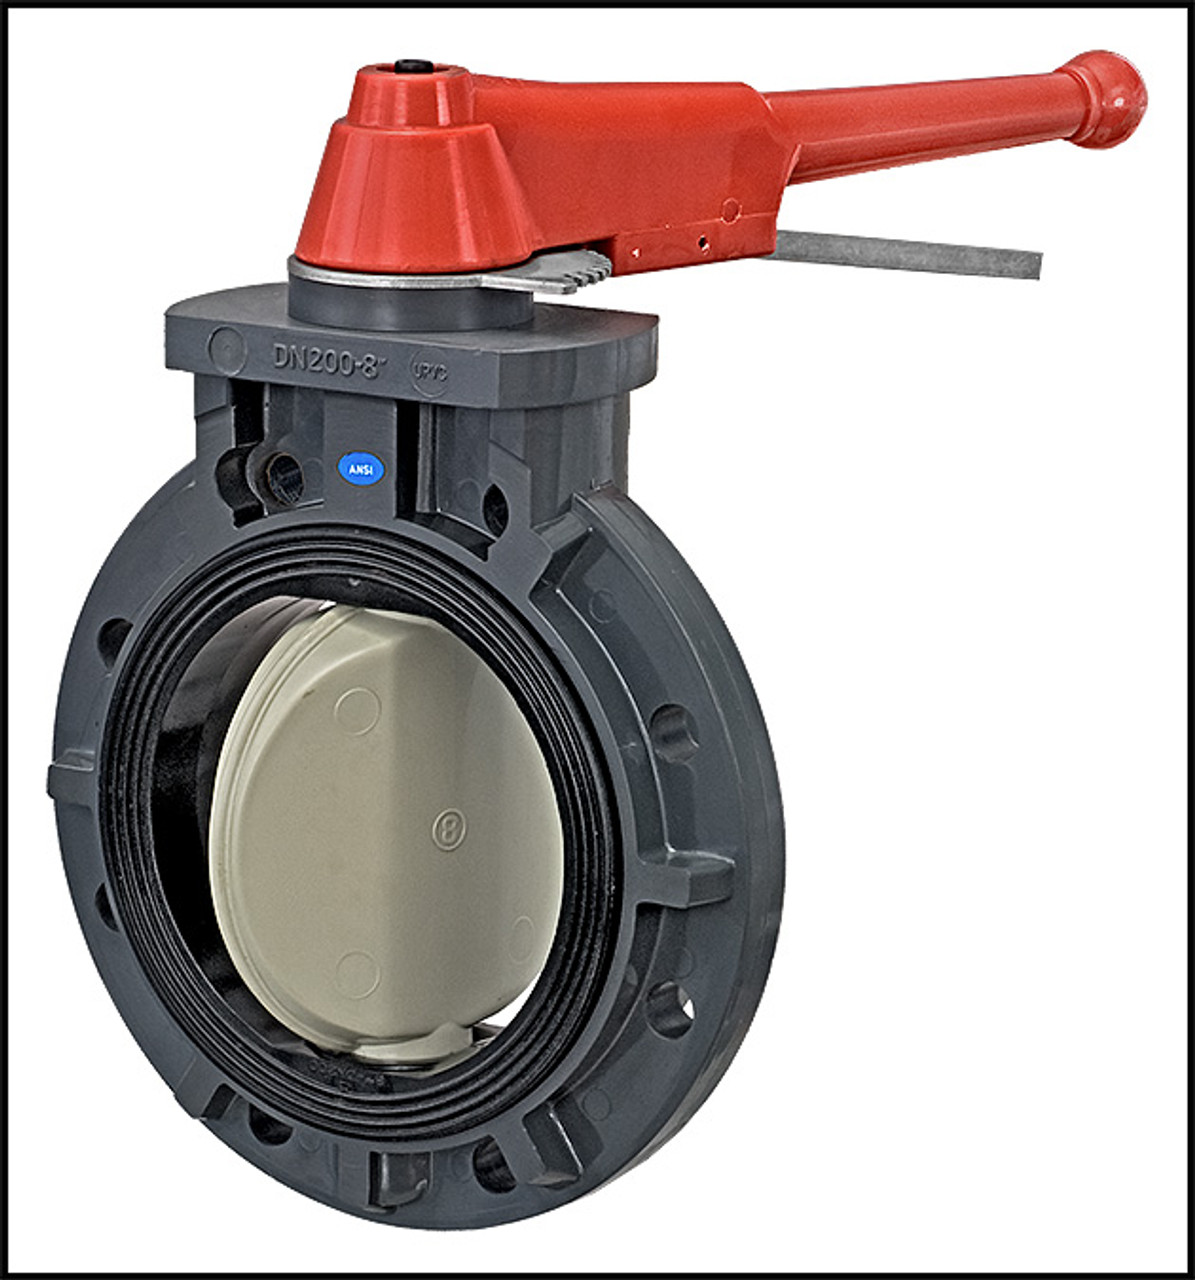 TVI Thermoplastic Valves 8" Plastic Wafer Valve With Handle (Substitute V1412) (#0800BFPXOEEWHL)